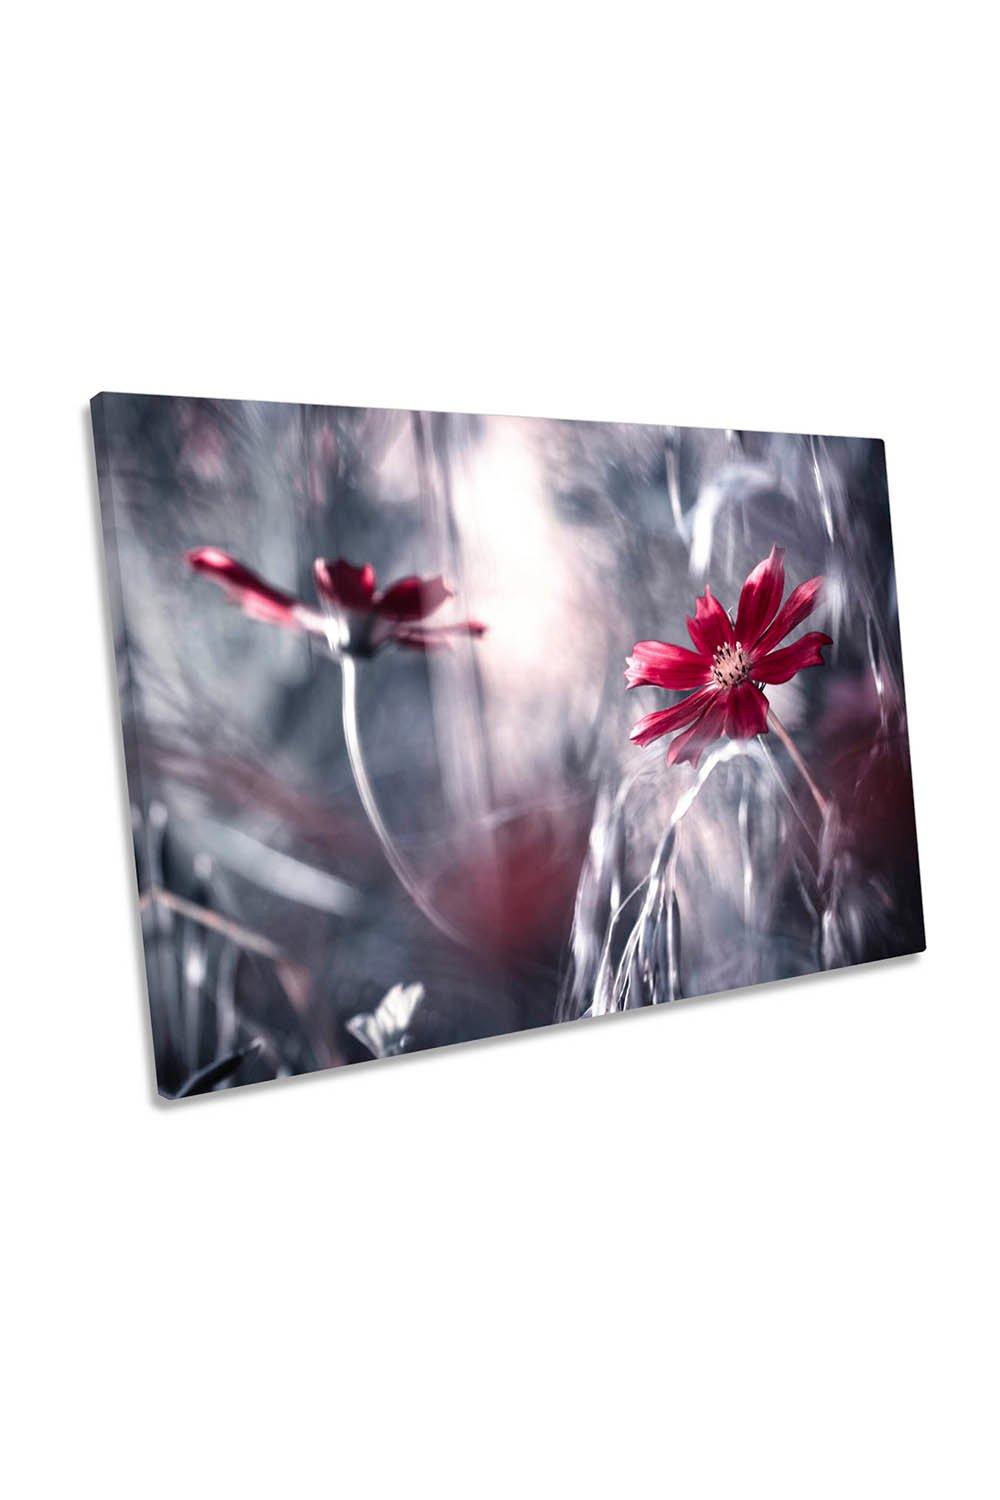 Seduction Games Red Flowers Canvas Wall Art Picture Print